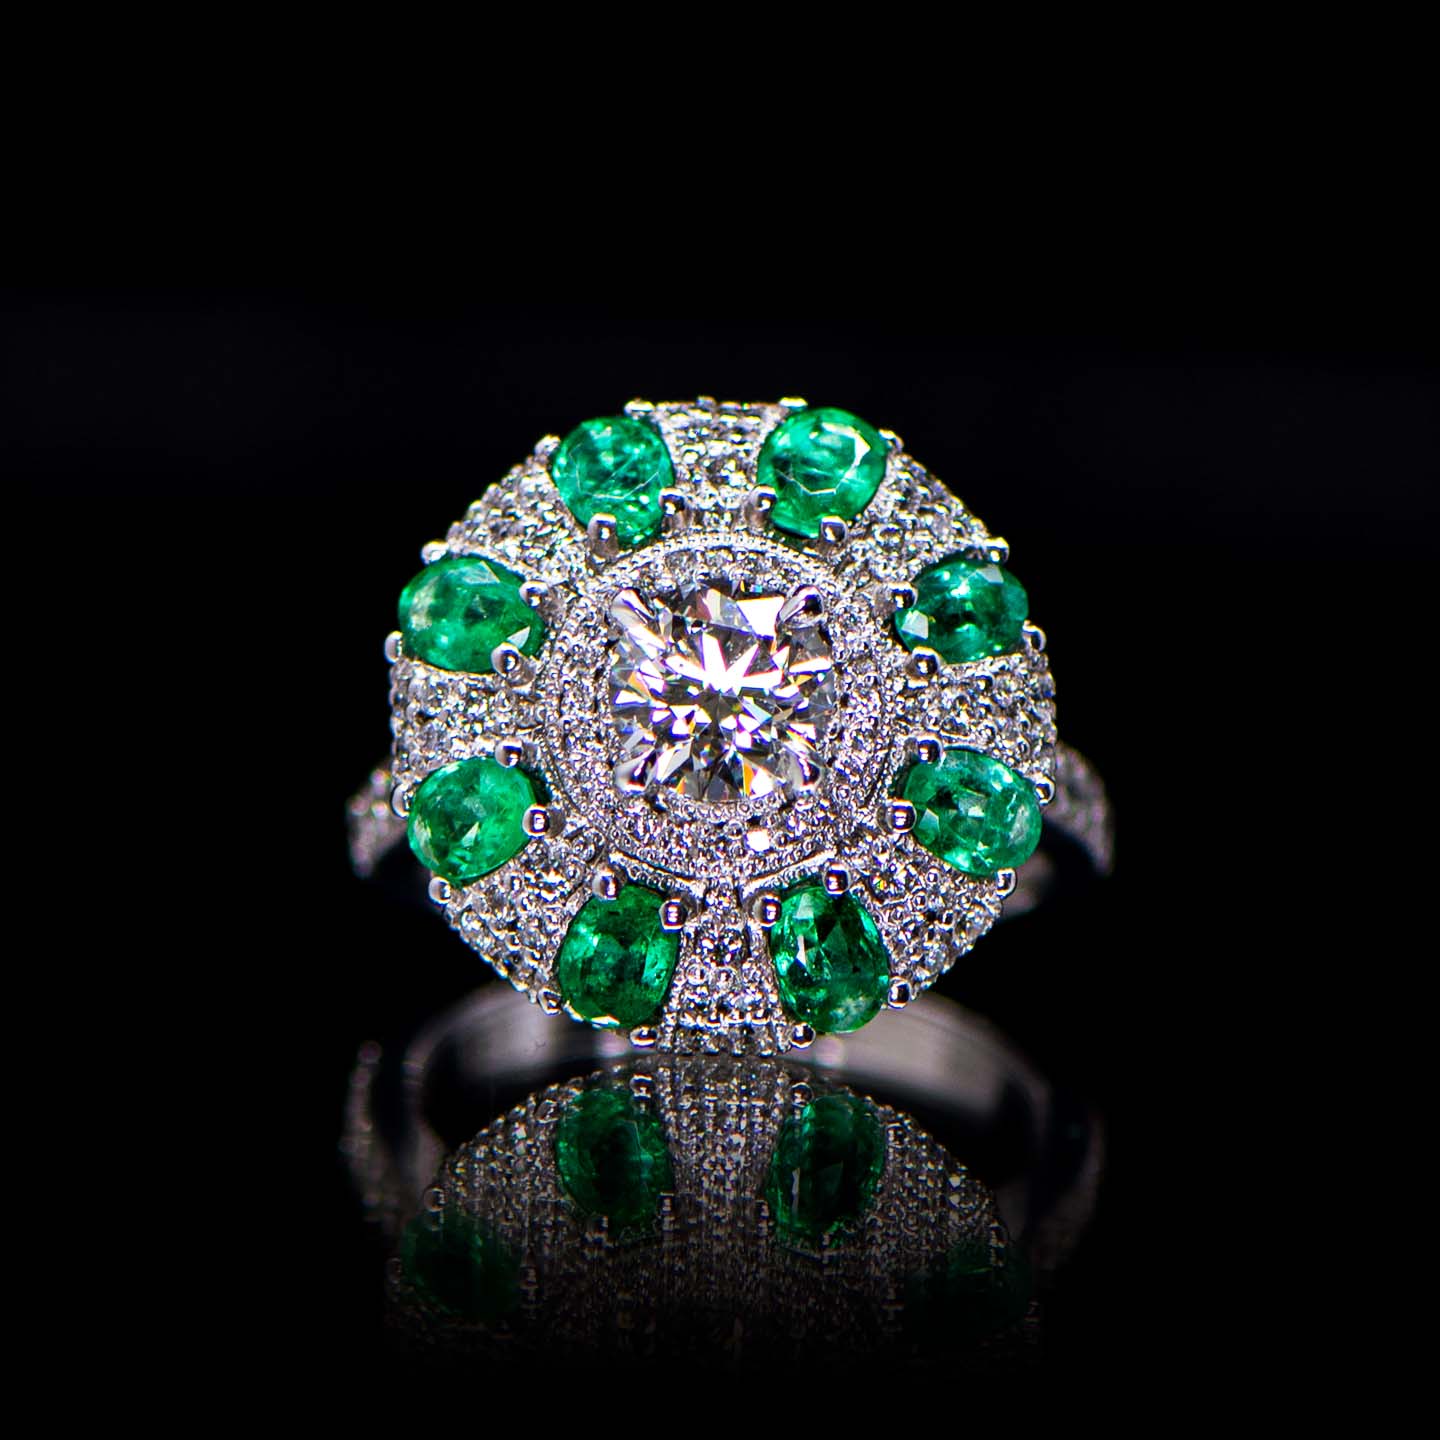 Emerald and diamond engagement or cocktail or anniversary ring in white gold